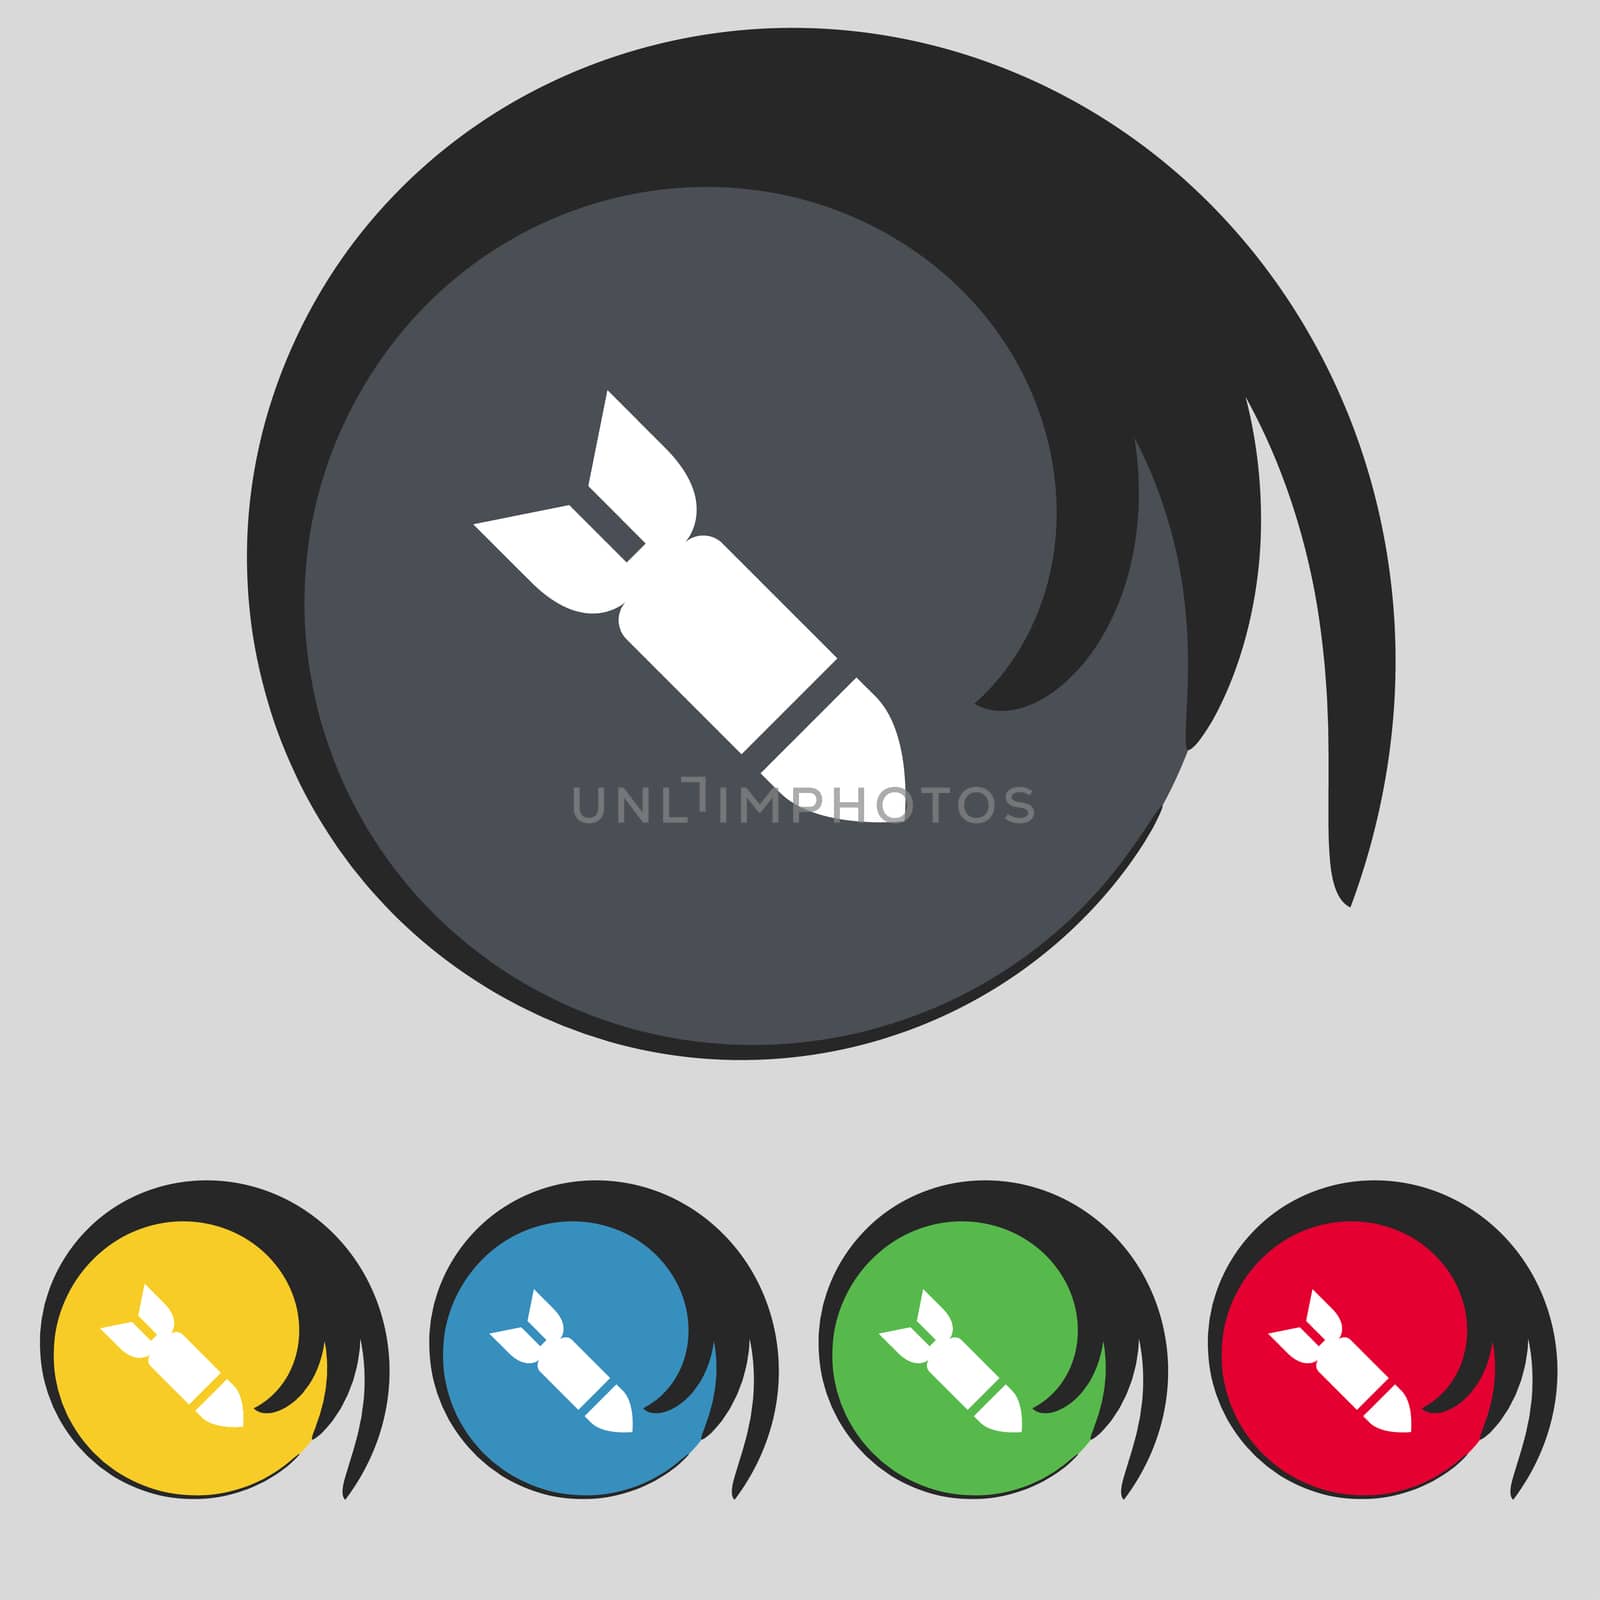 Missile,Rocket weapon icon sign. Symbol on five colored buttons. illustration